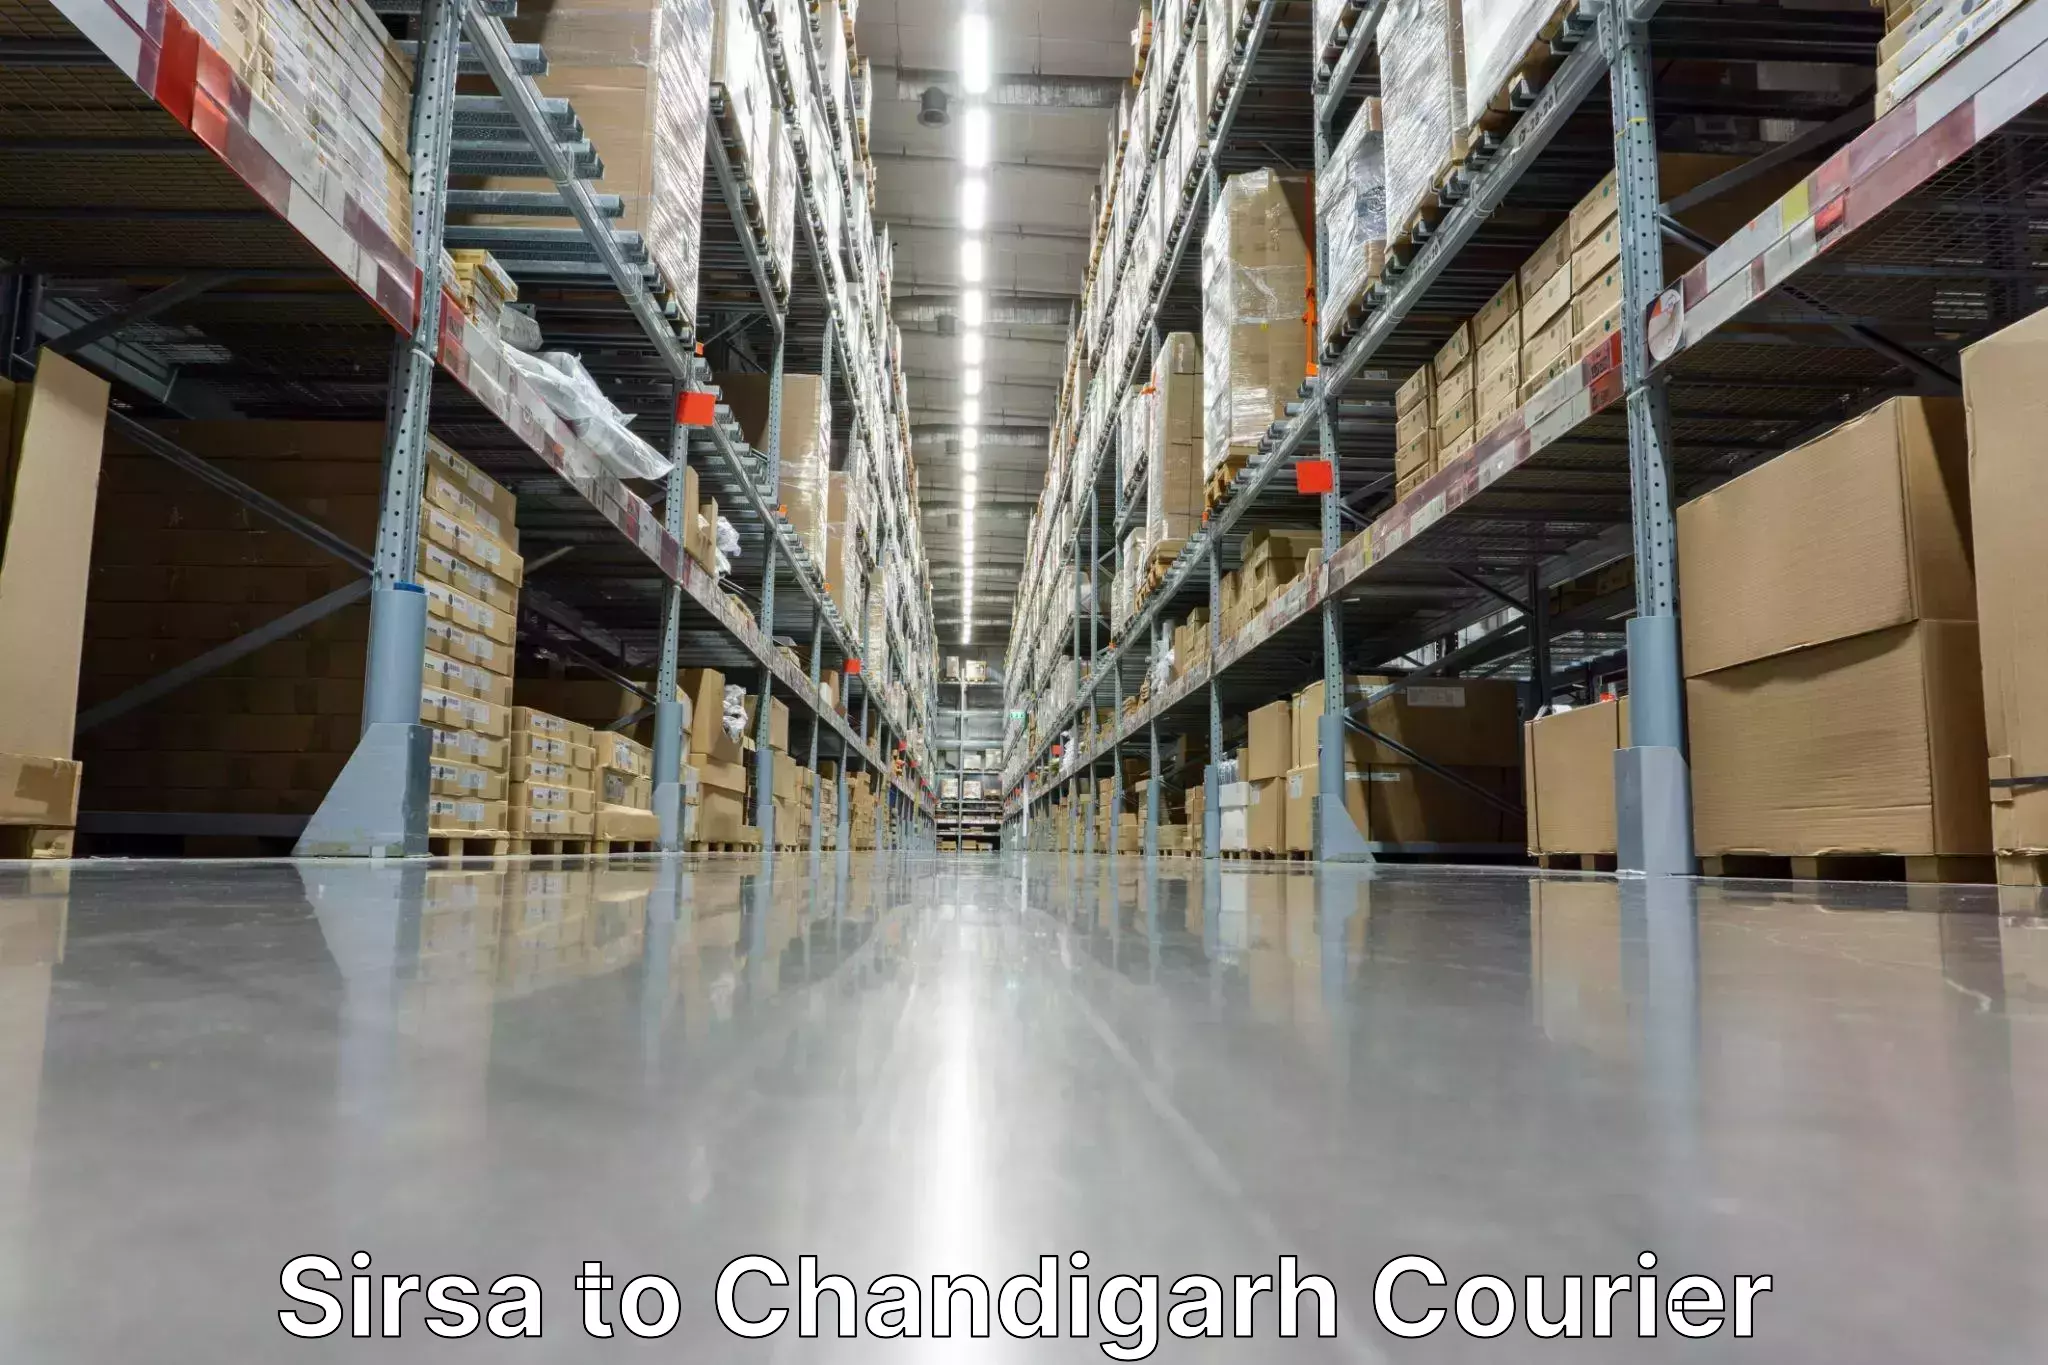 Package delivery network Sirsa to Chandigarh